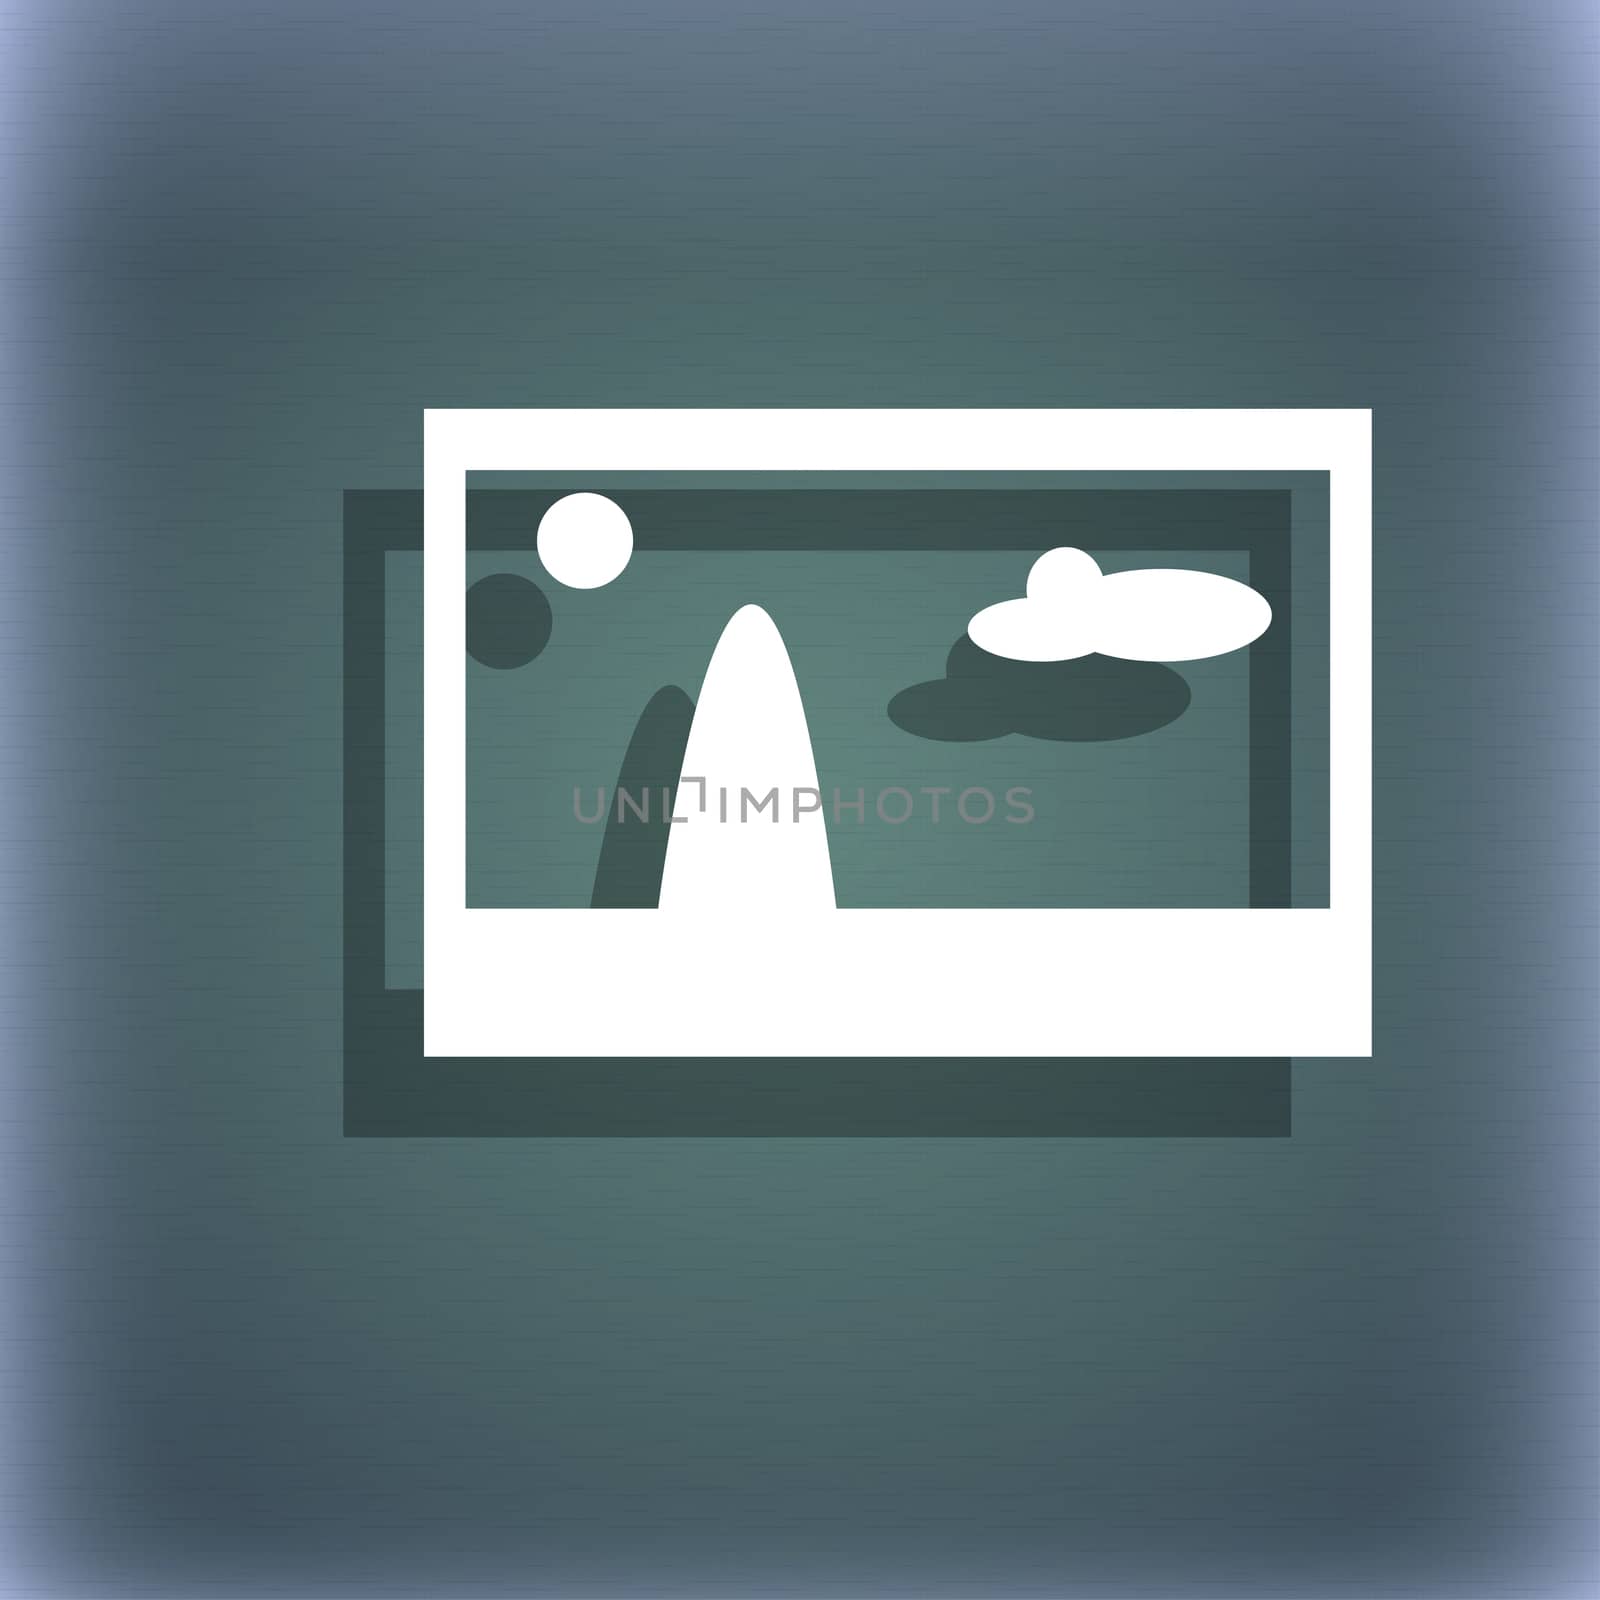 File JPG sign icon. Download image file symbol. On the blue-green abstract background with shadow and space for your text. illustration